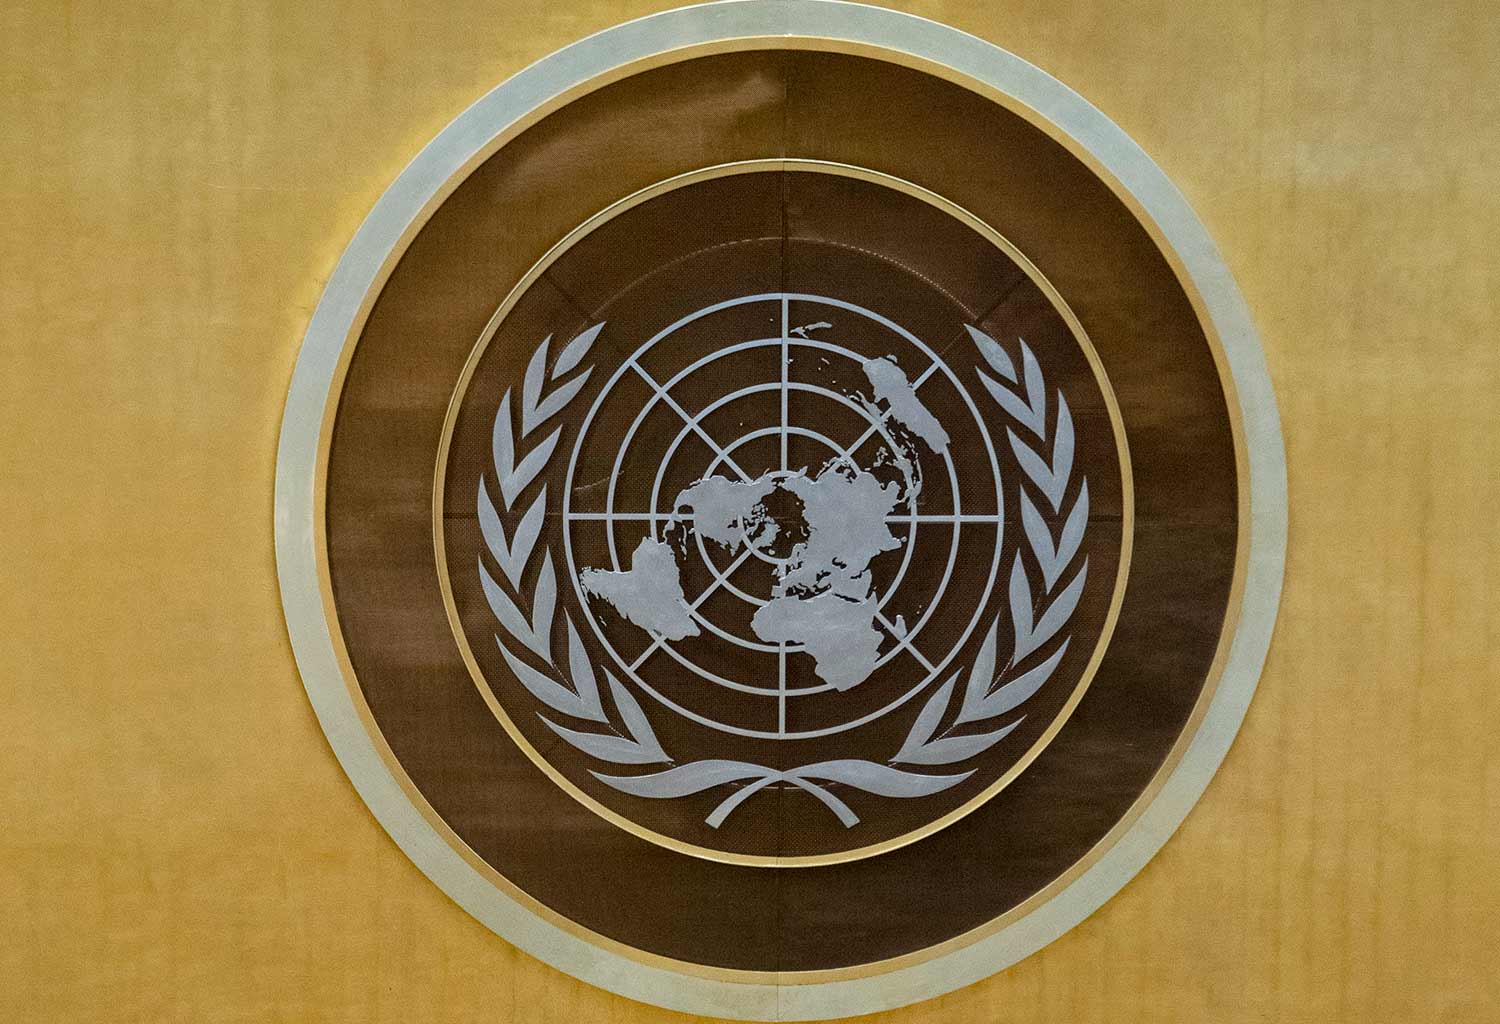 Close up view of the UN emblem in gold at the General Assembly hall.